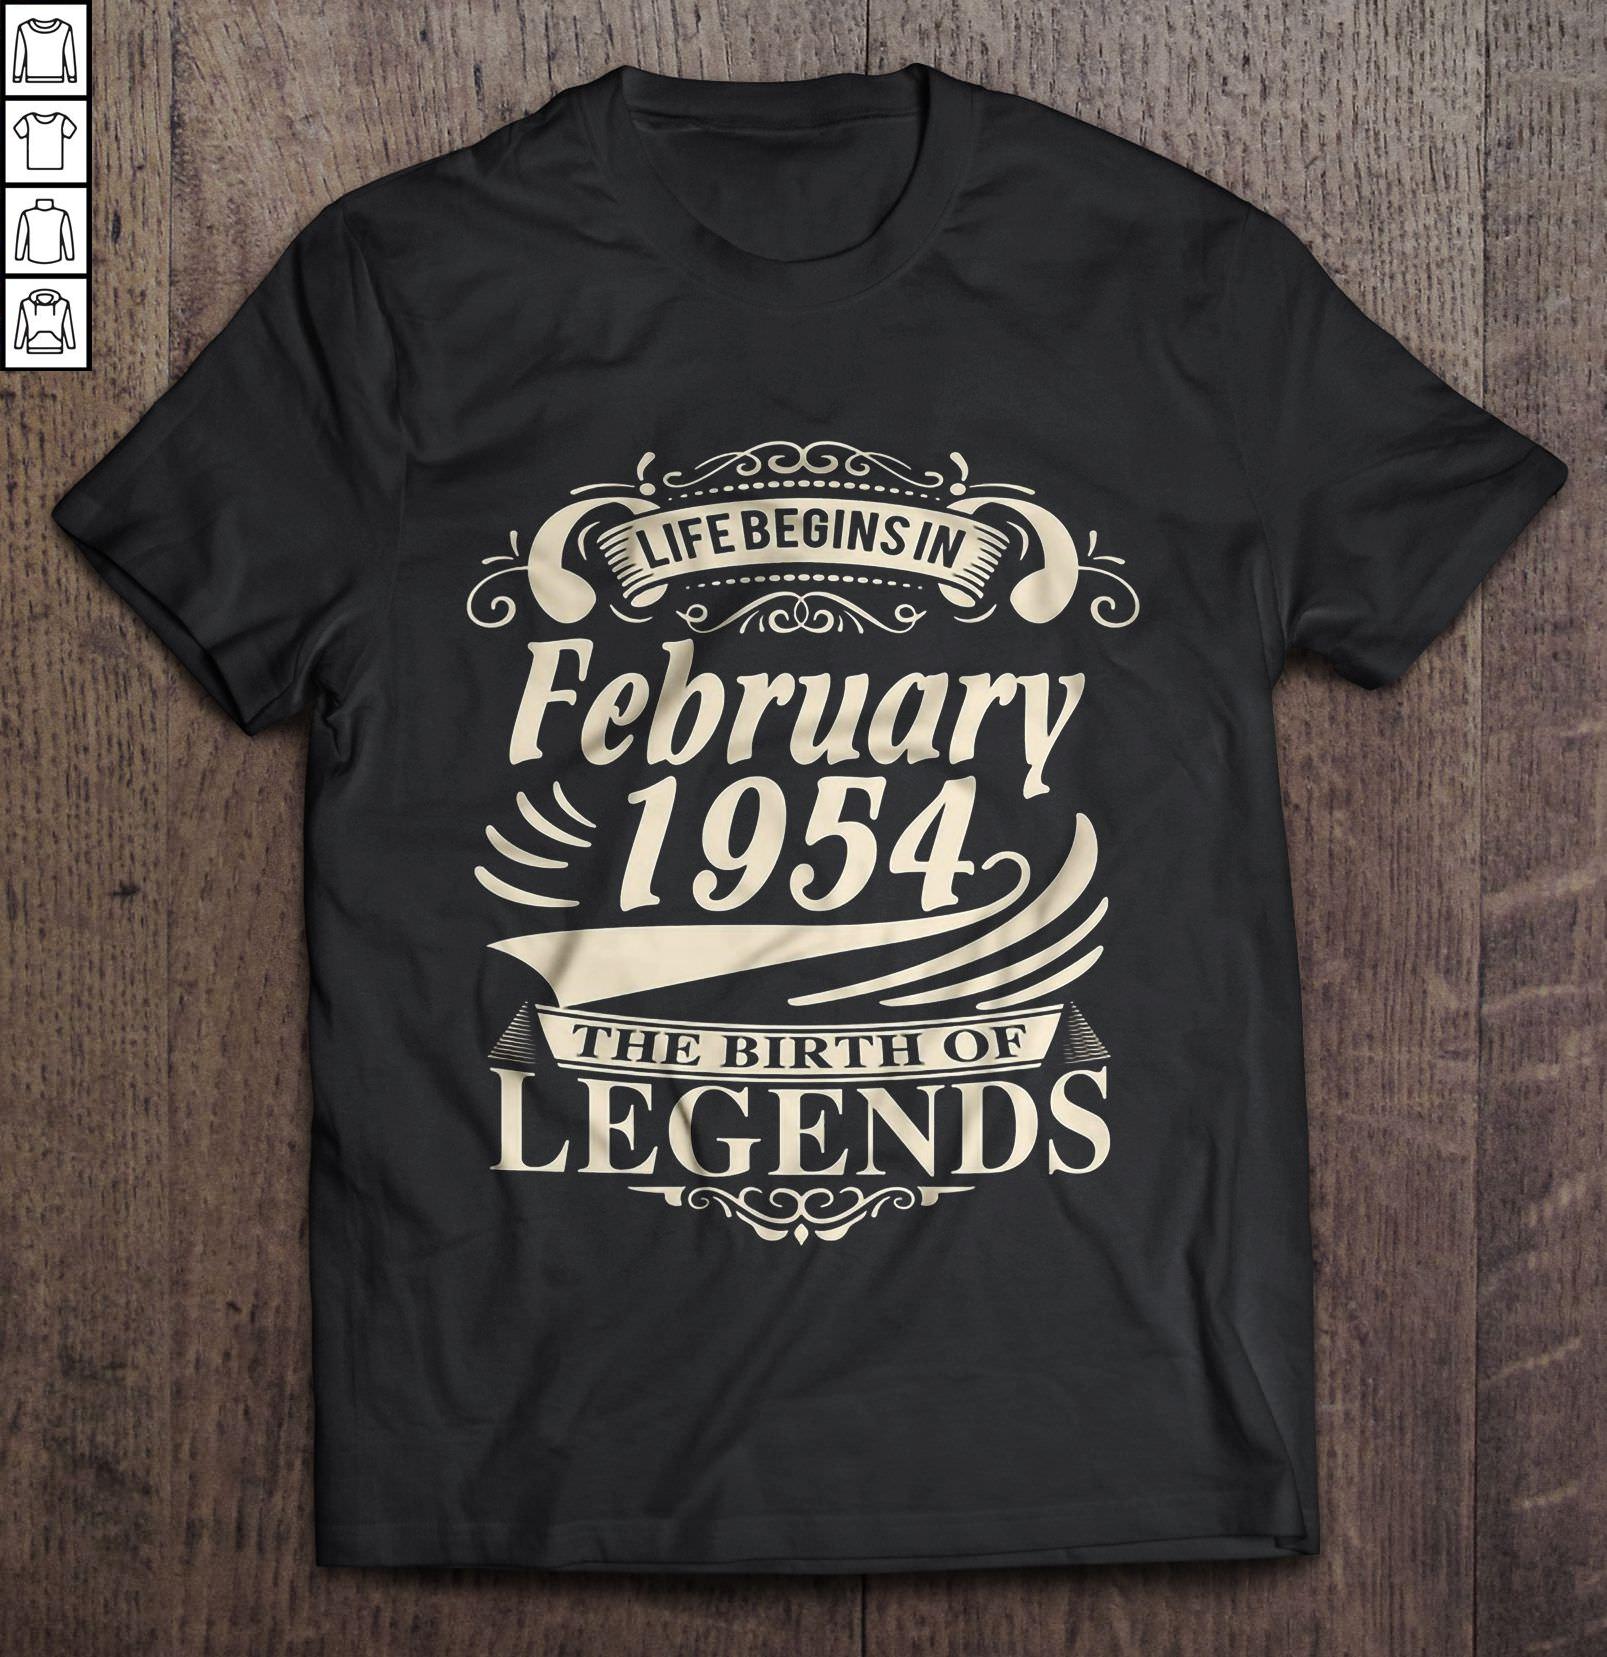 Life Begins In February 1954 The Birth Of Legends TShirt